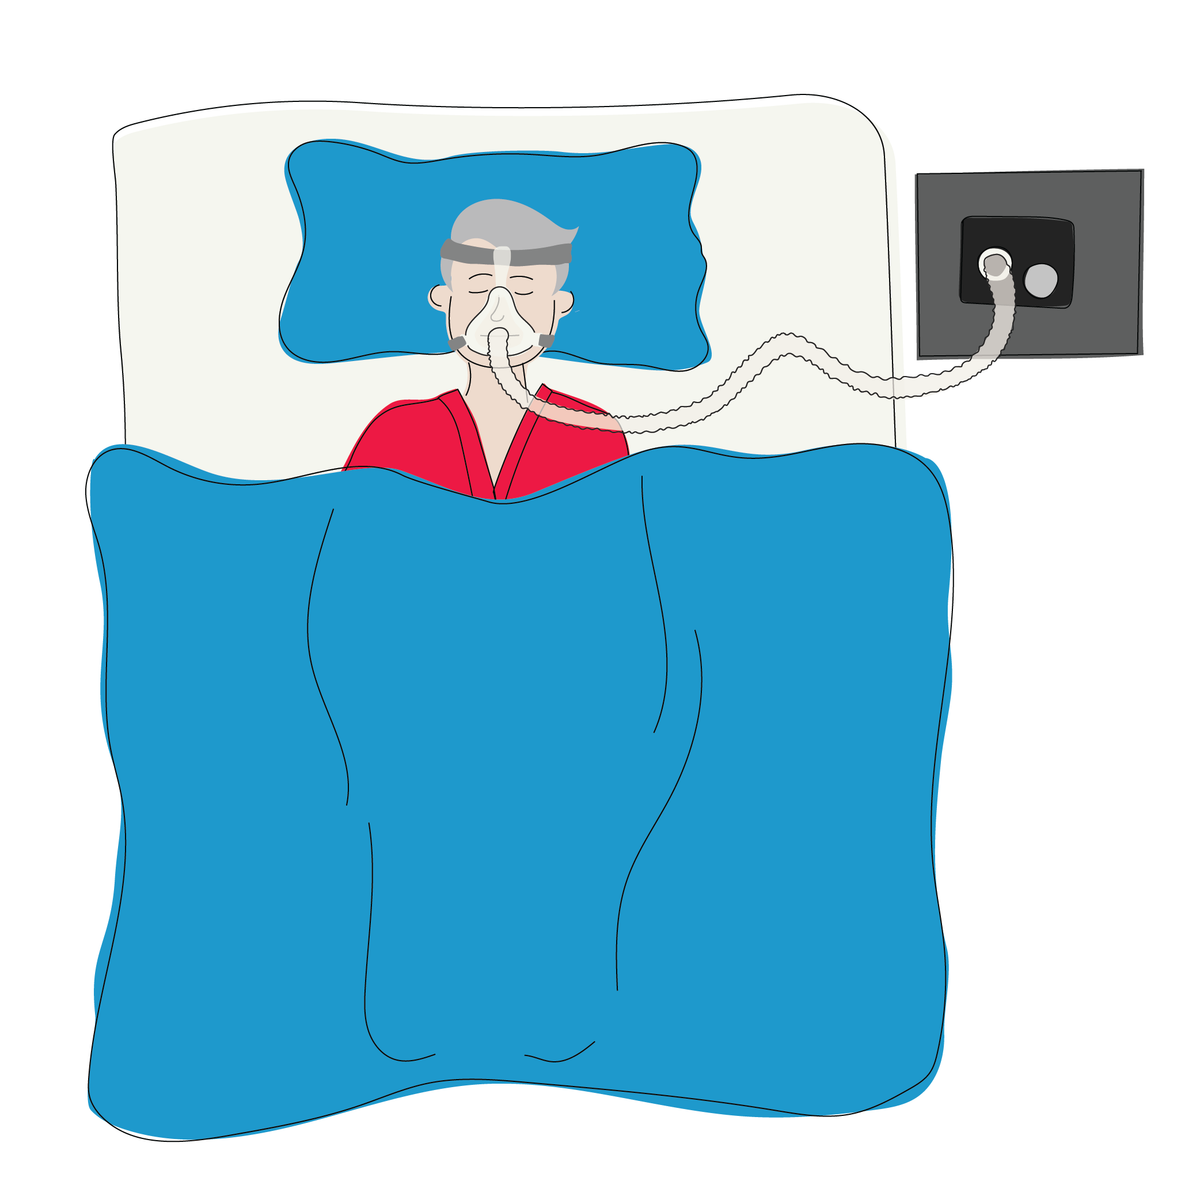 A graphic of a man sleeping on his back using a CPAP machine